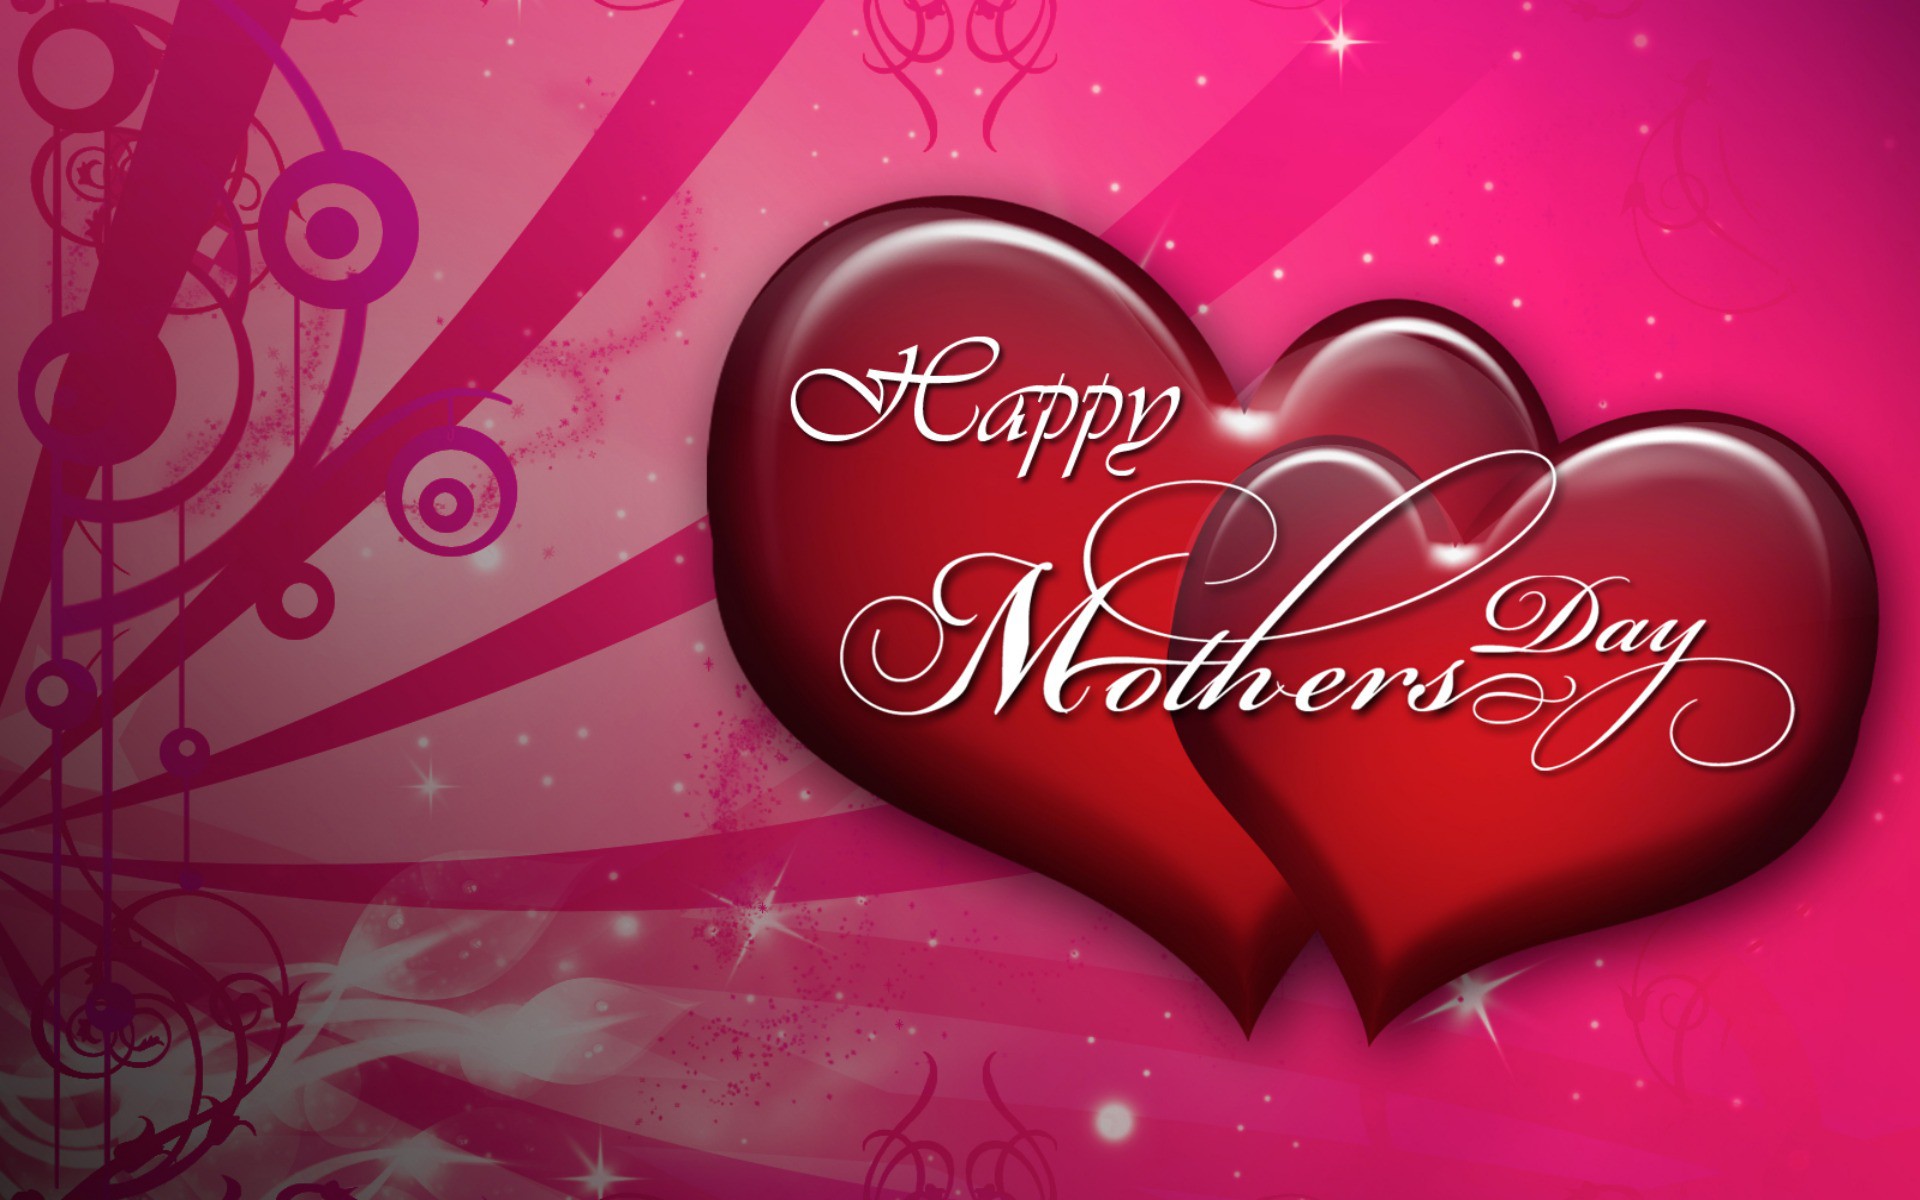 mothers wallpaper free download,heart,red,love,text,valentine's day